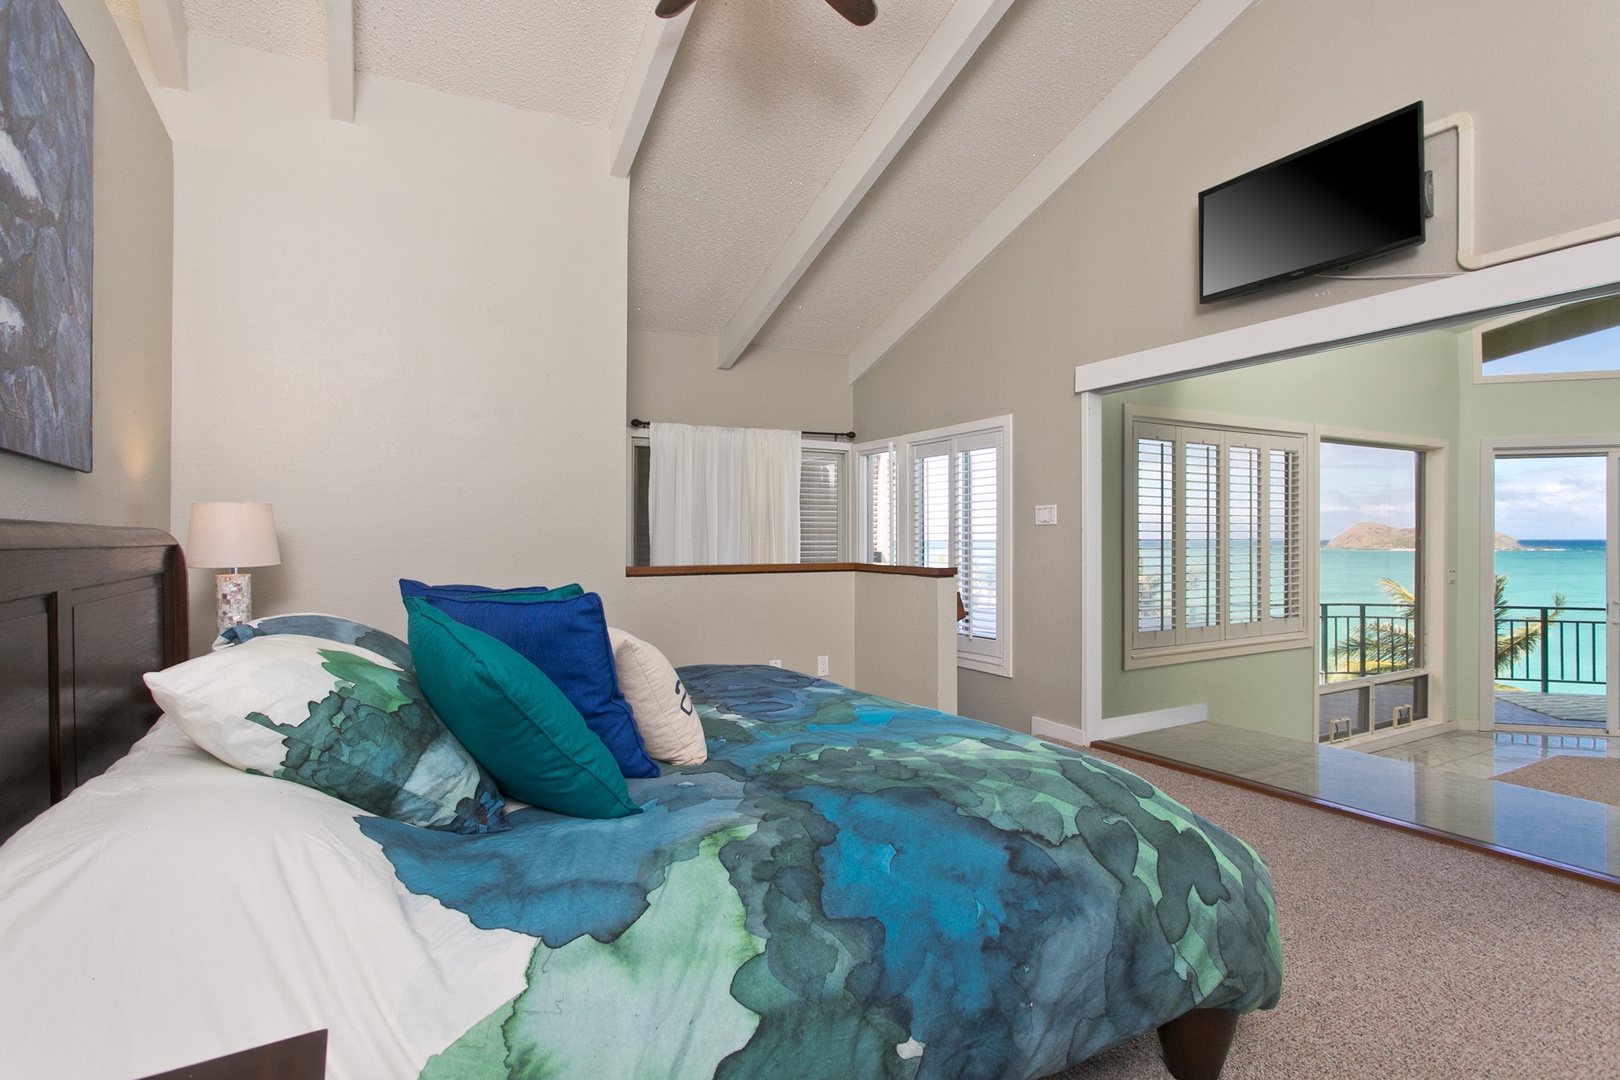 Kailua Vacation Rentals, Hale Kolea* - With a smart TV and a private living, mini-kitchen and lanai, the suite has it all!